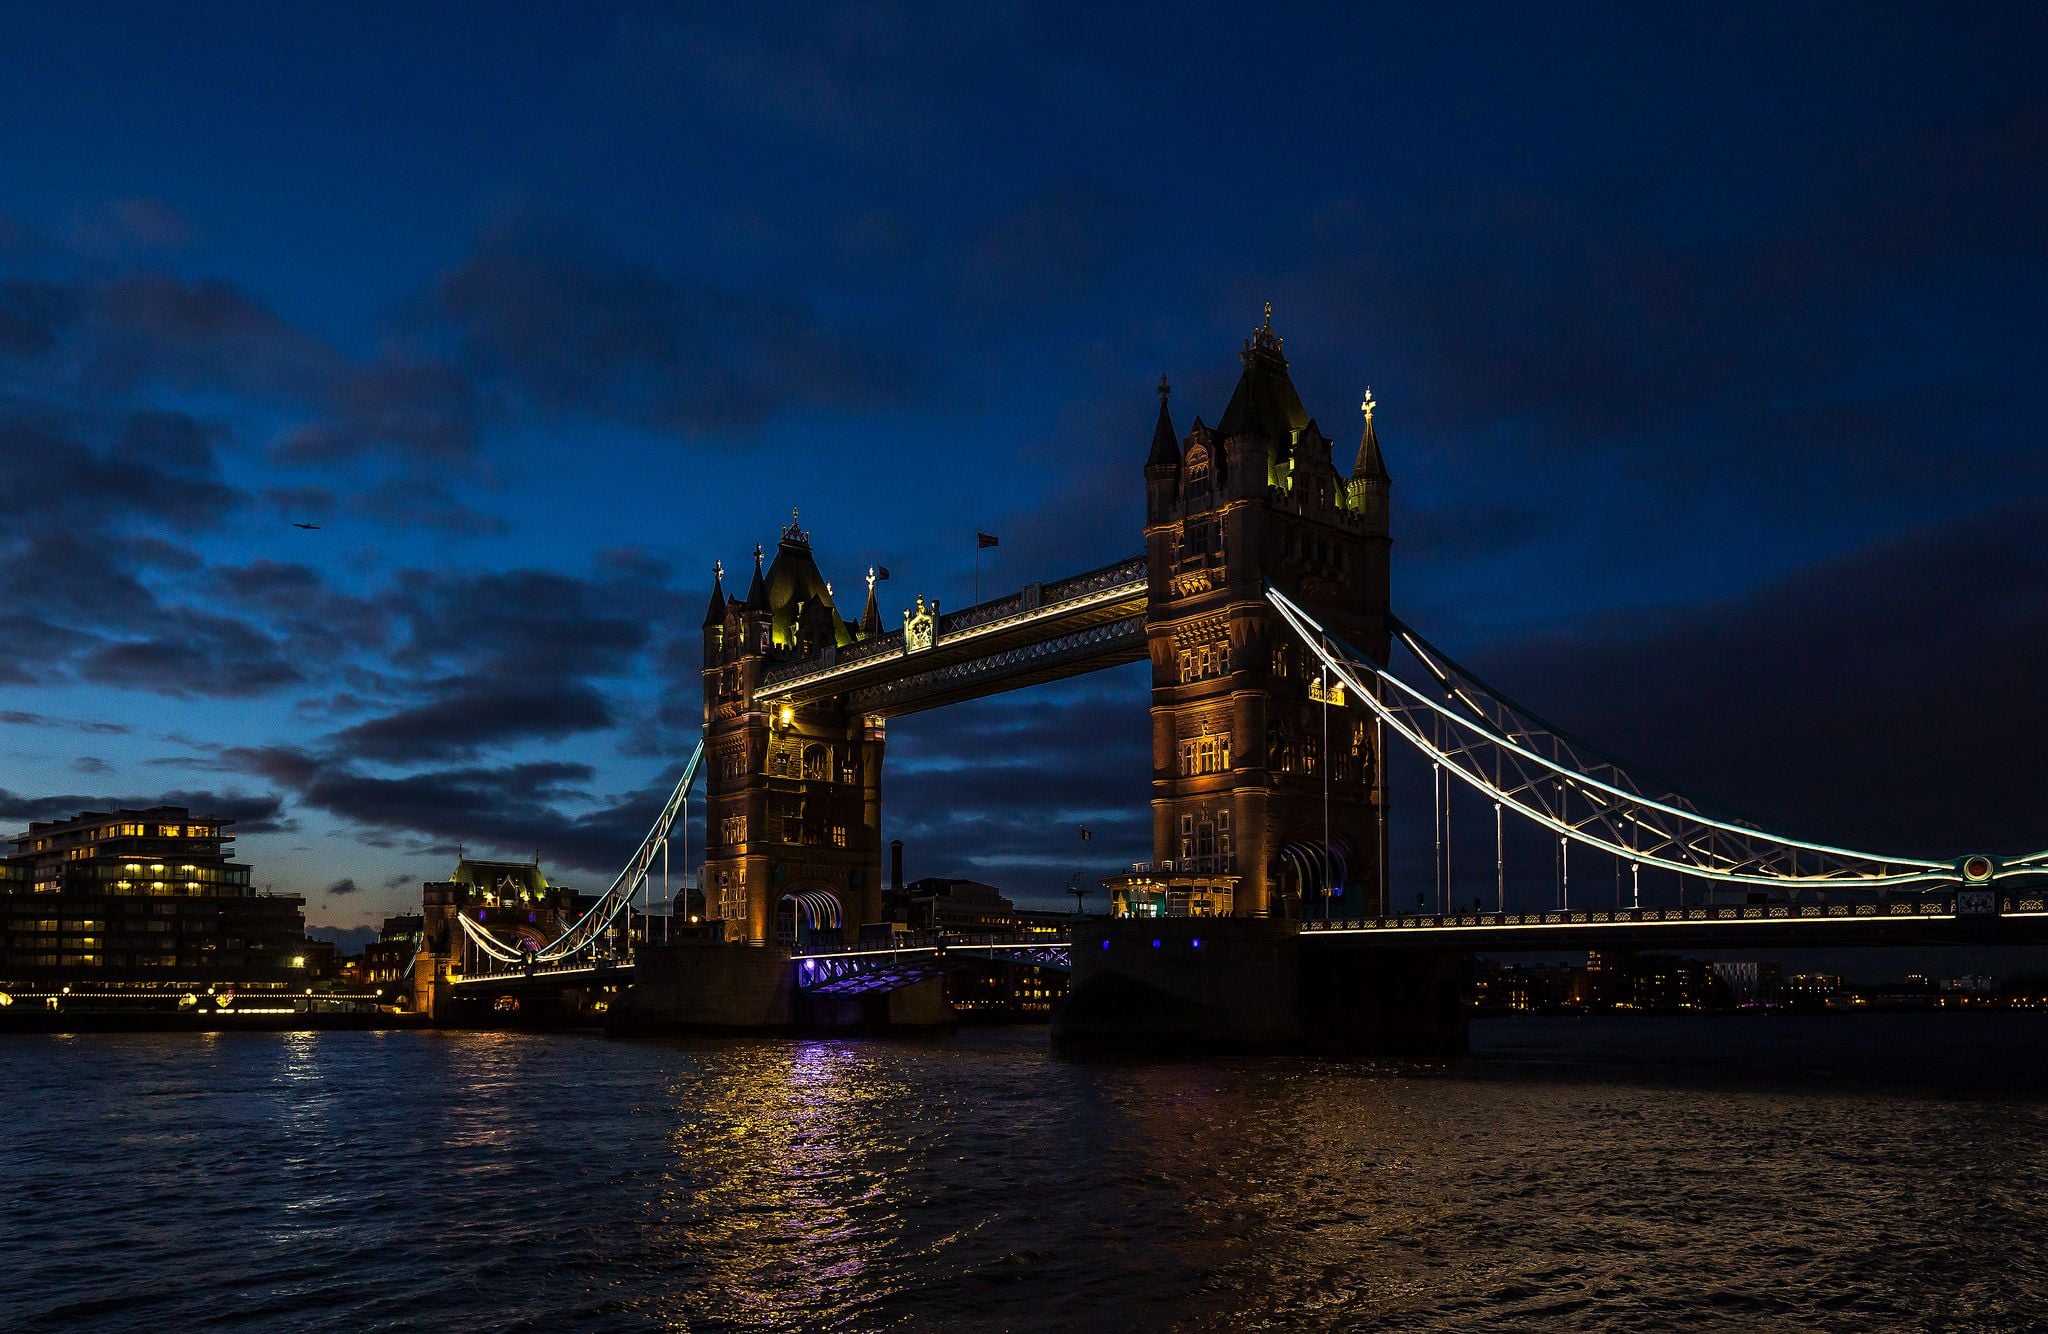 London Tower Bridge wallpapers HD backgrounds pictures